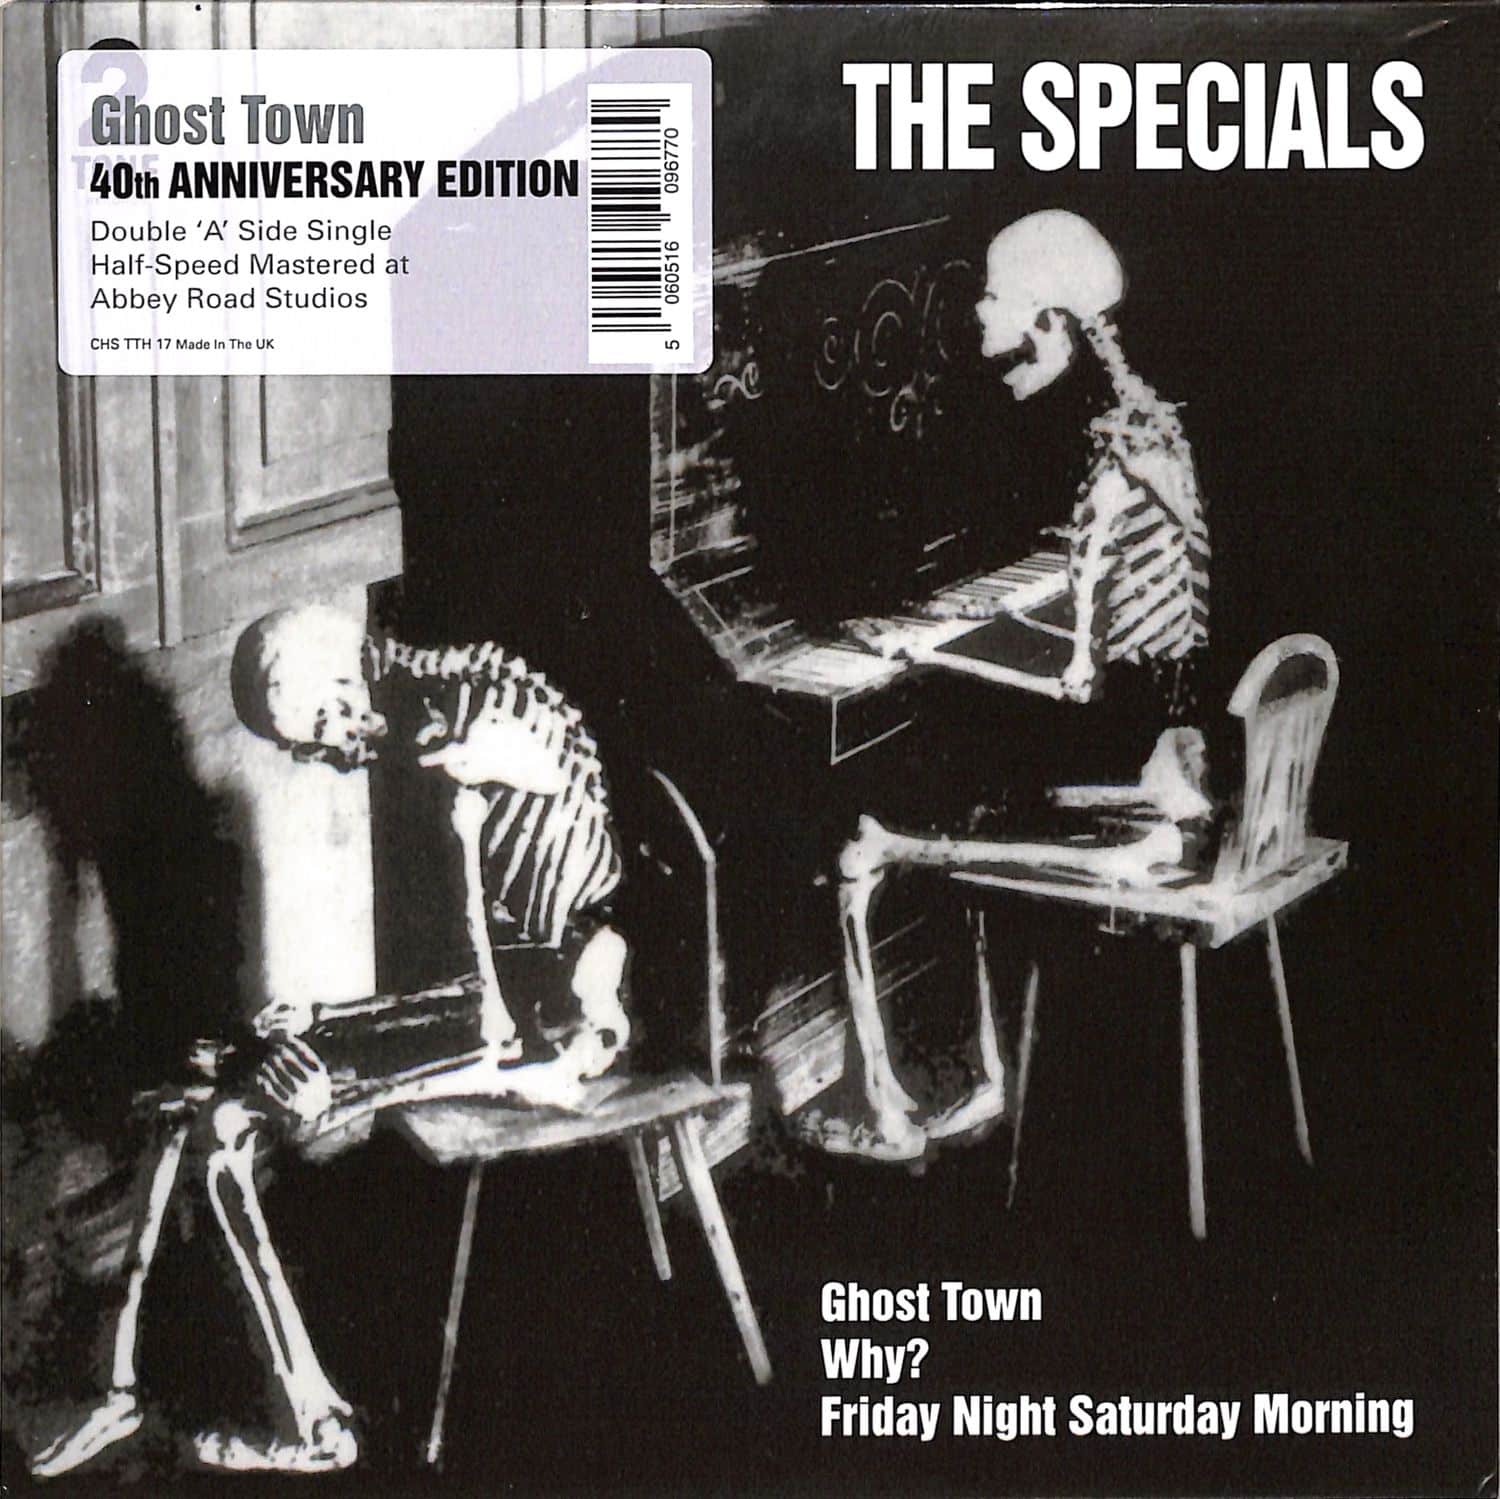 The Specials - GHOST TOWN 